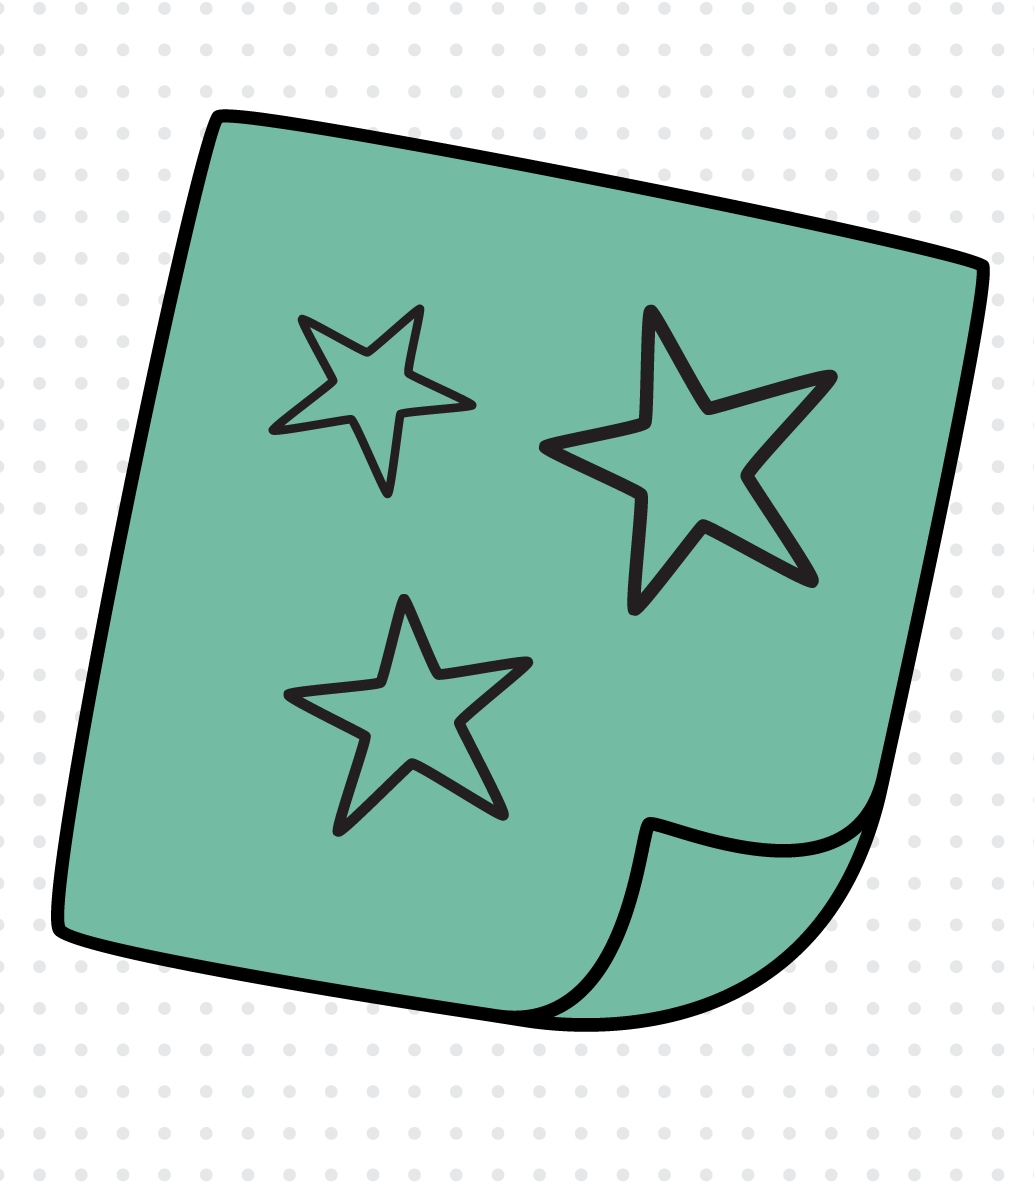 Illustration of post-it note with stars drawn on it